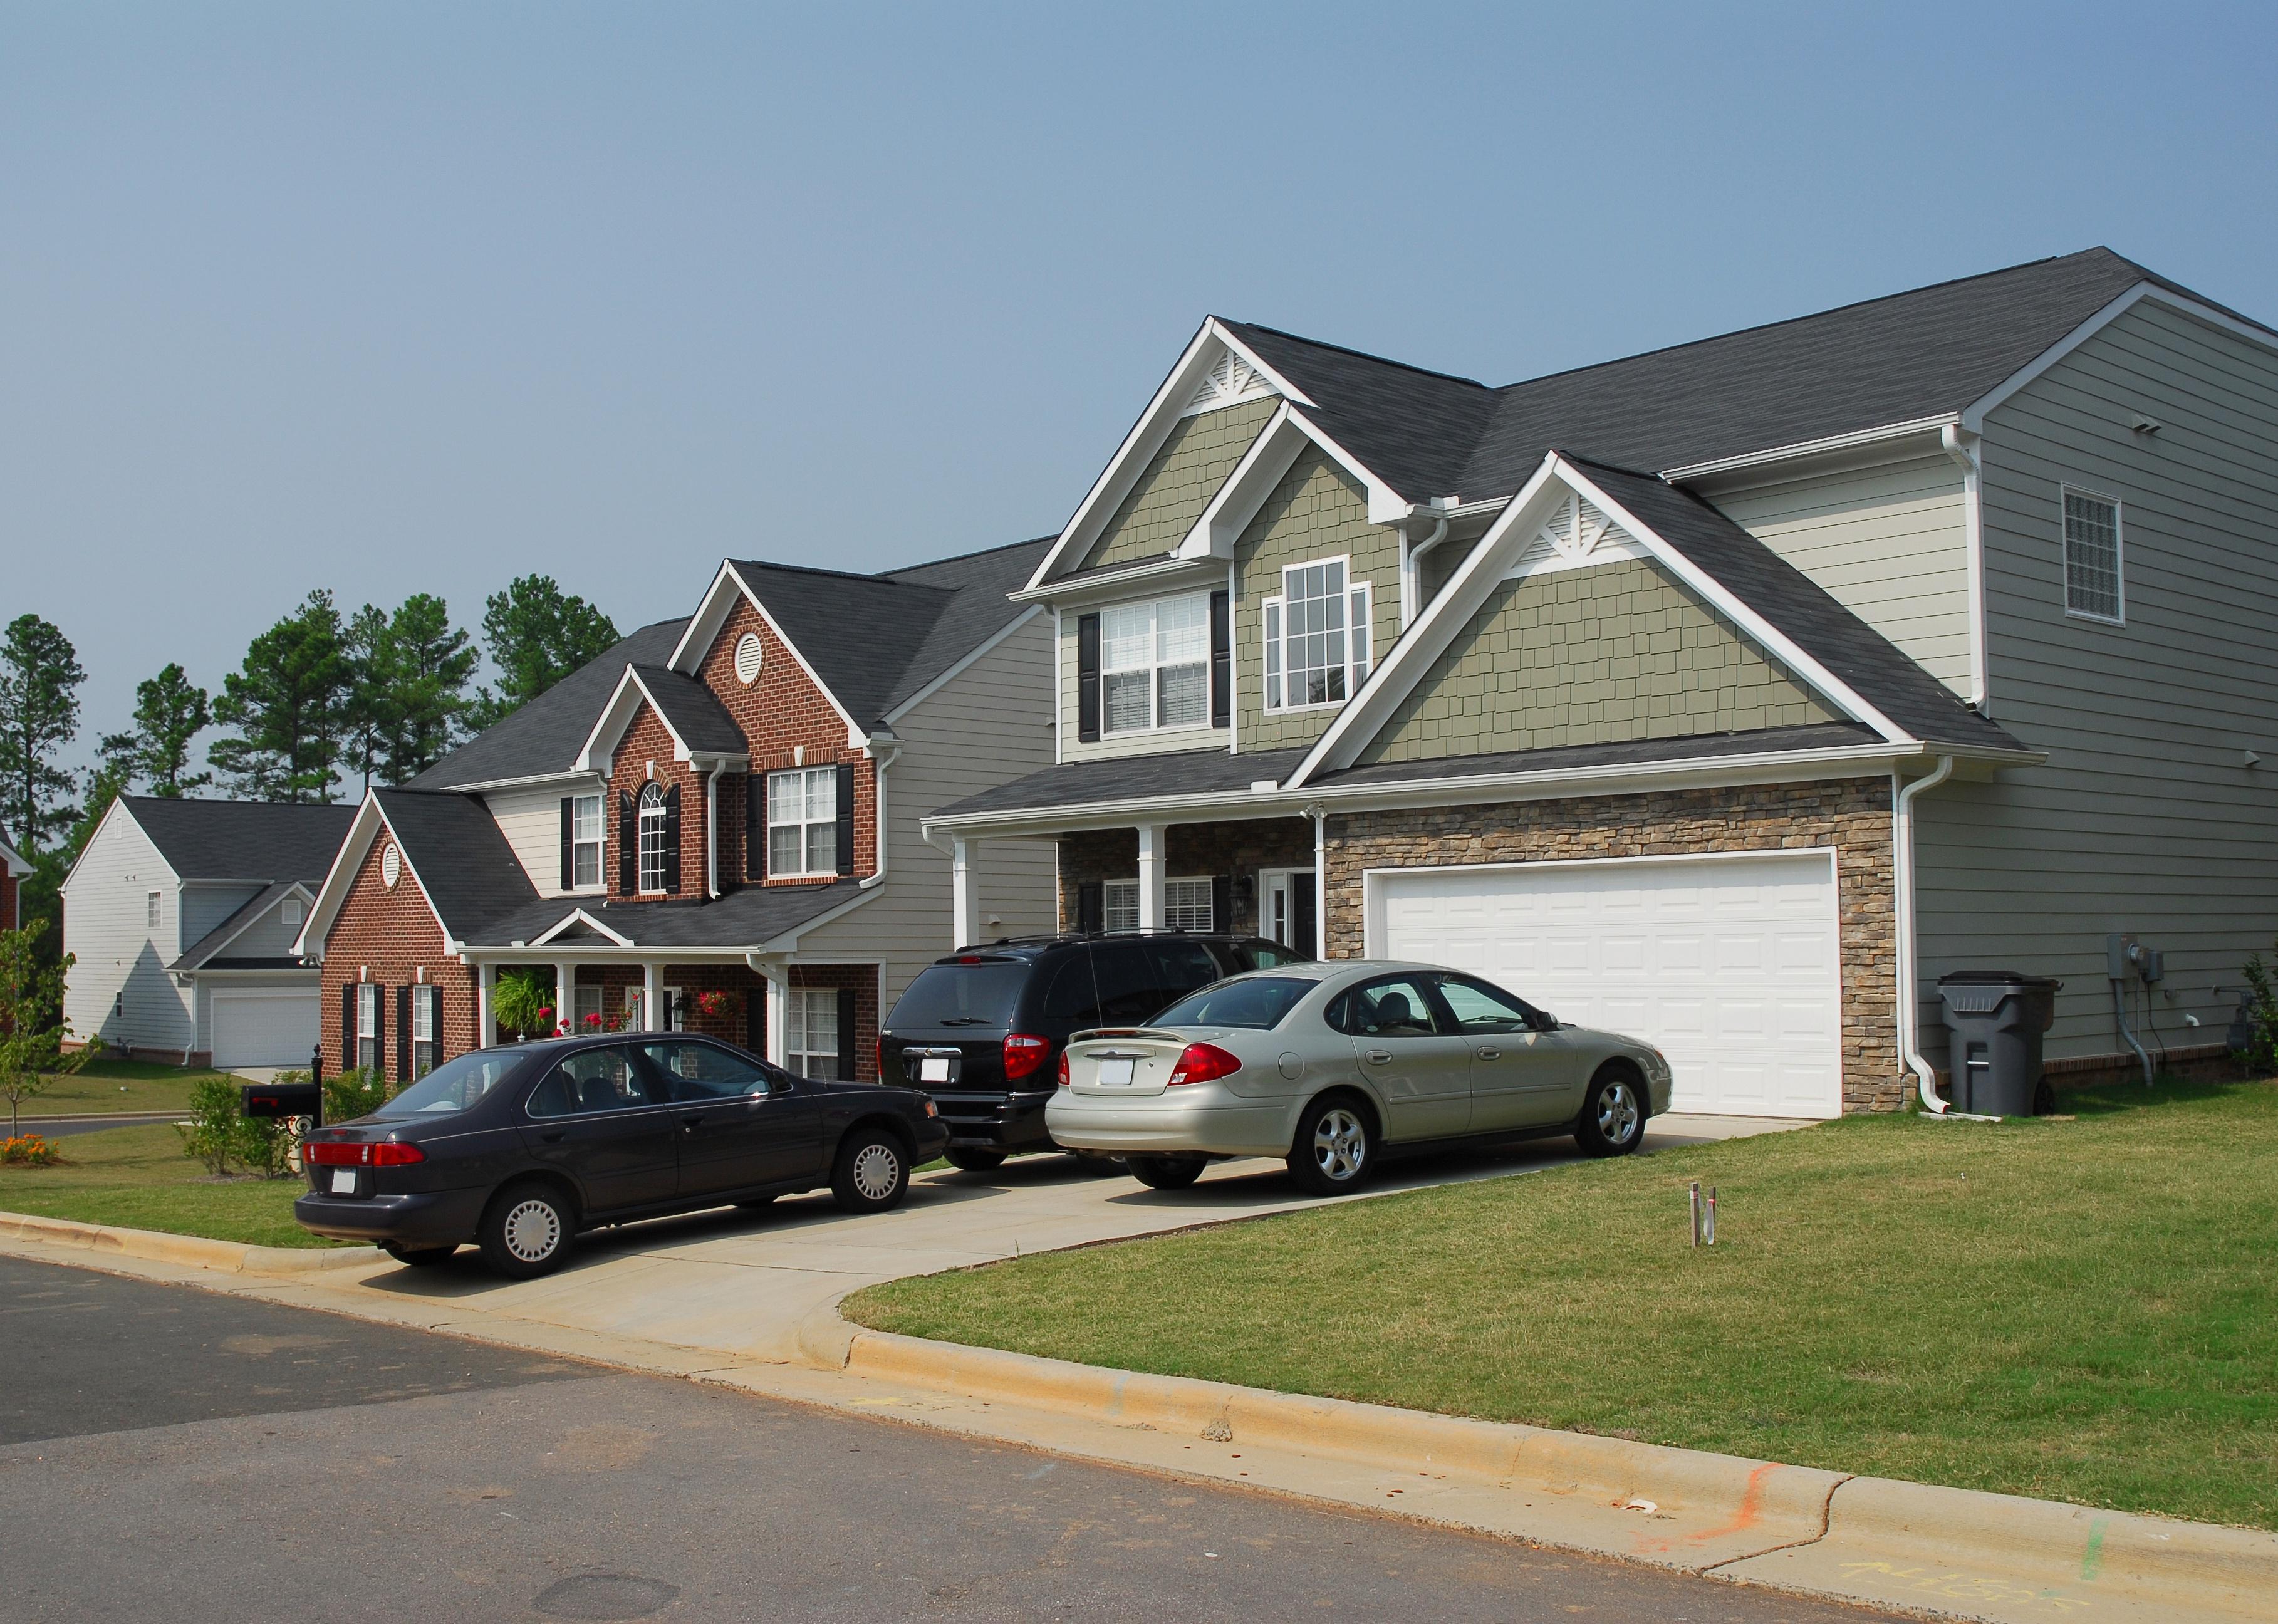 Modern residential houses with cars in the driveway.